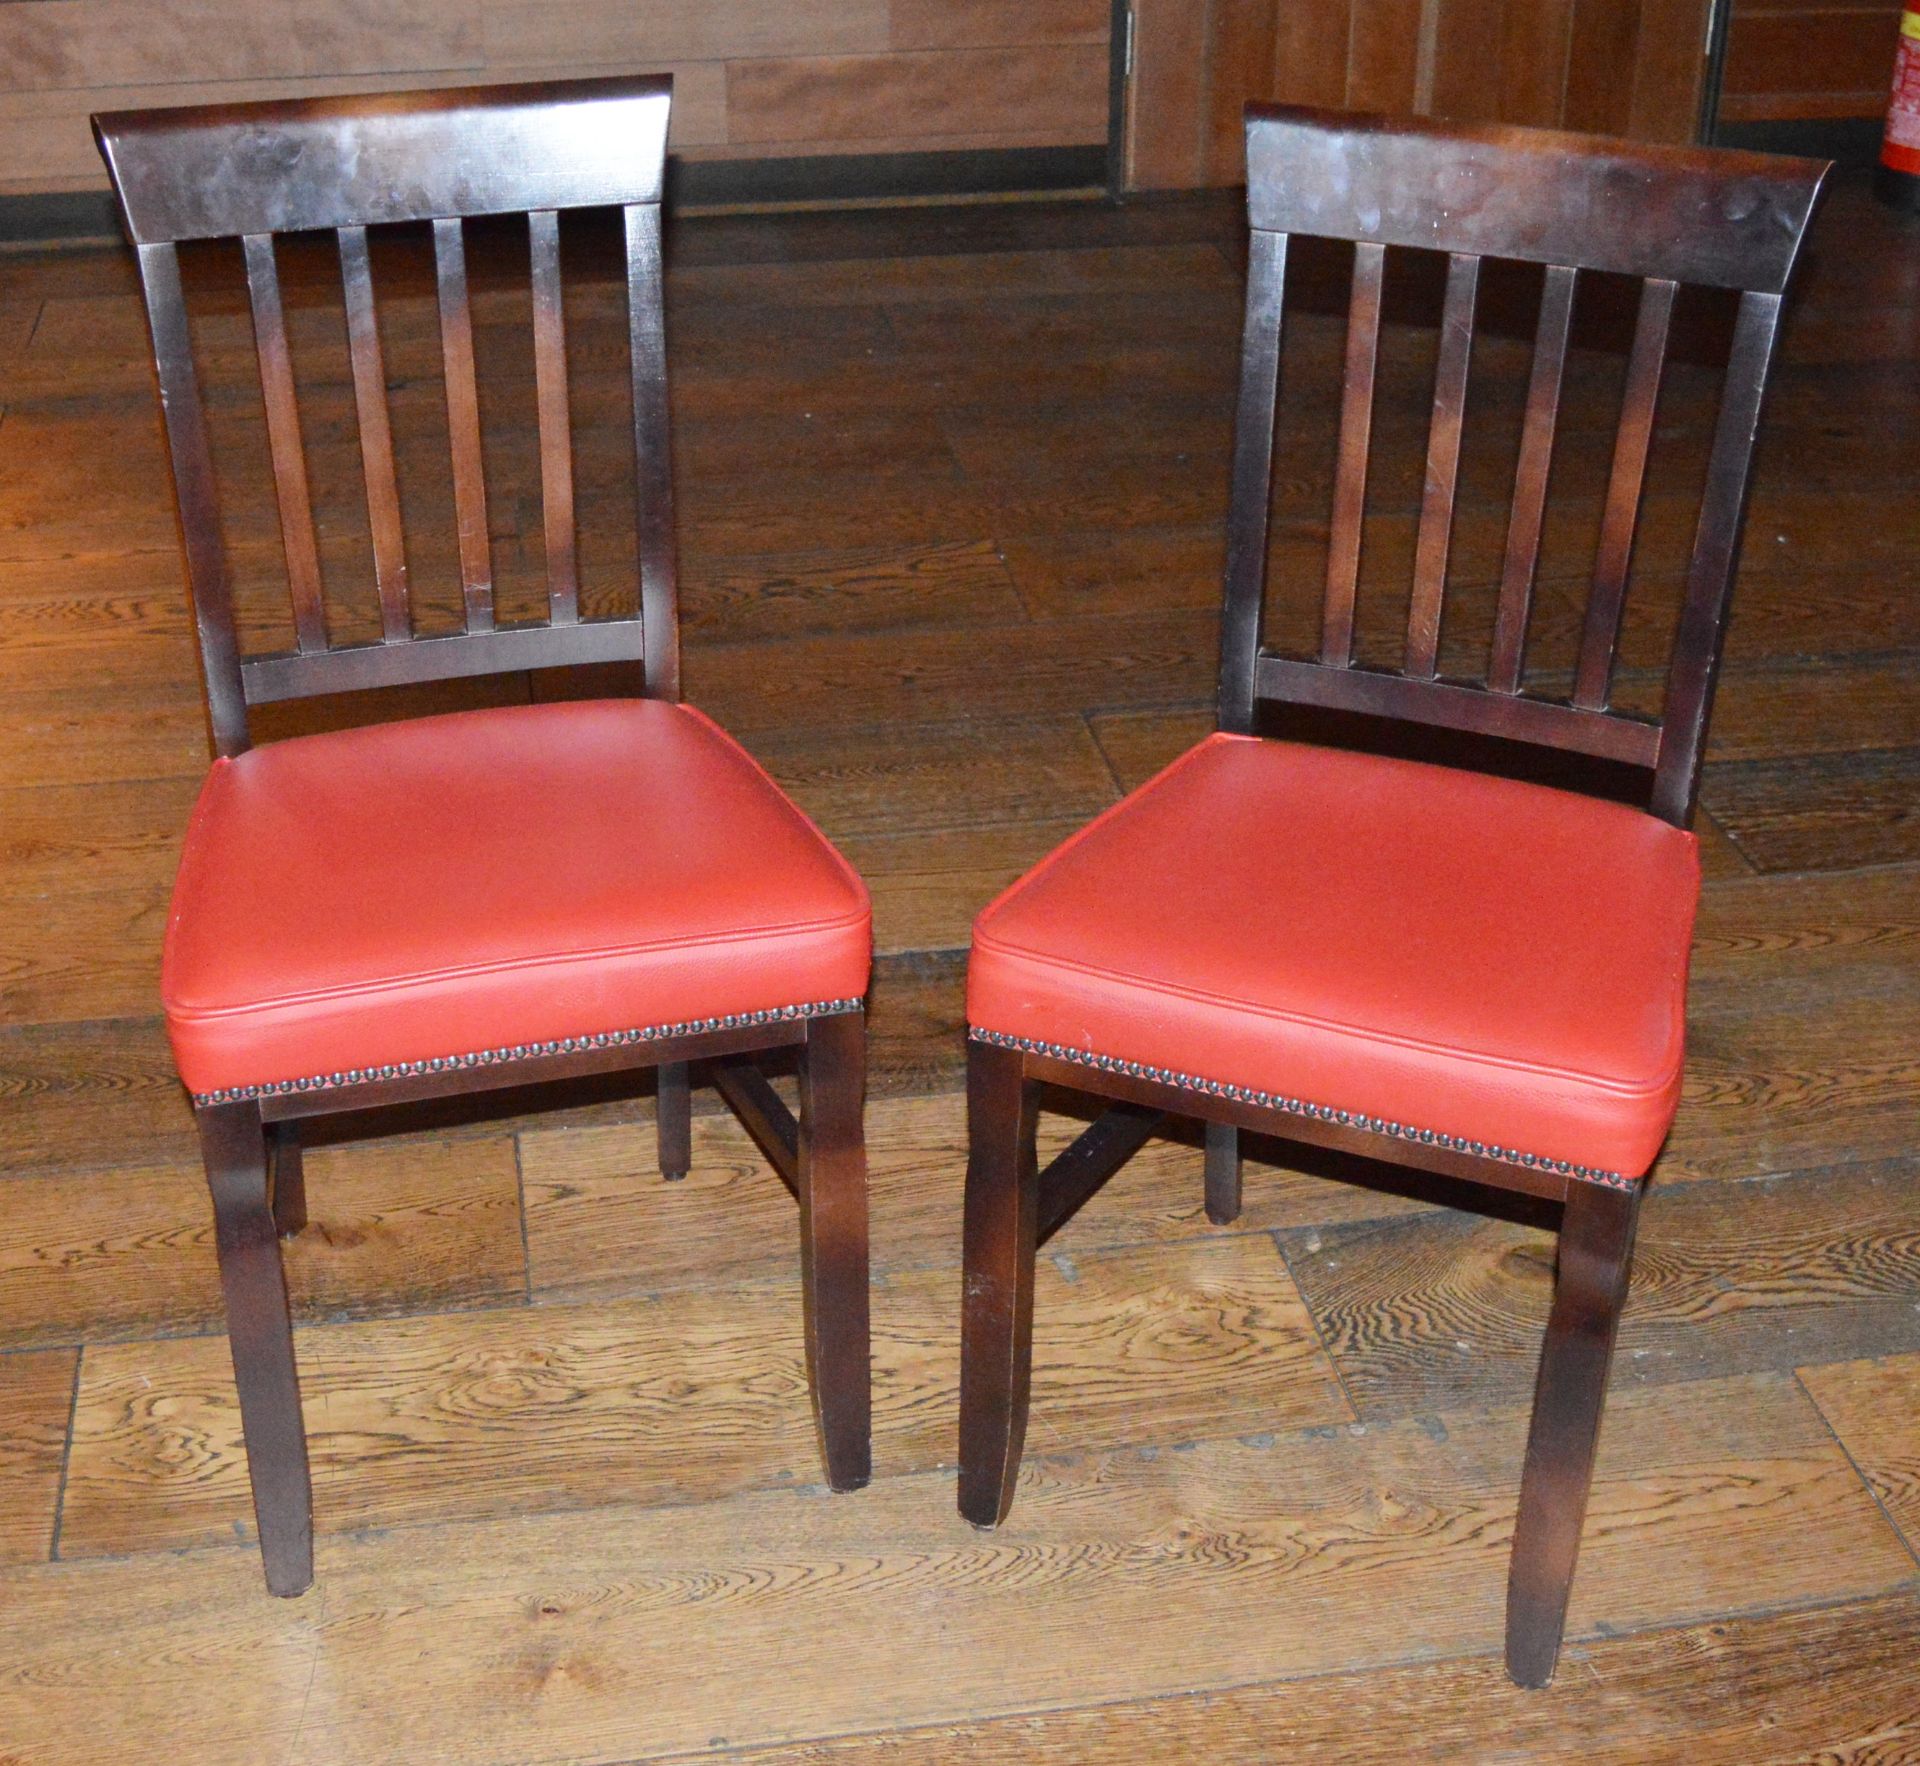 4 x Harley Chairs With Hardwoord Frames - Height 90 x Width 44 x Depth 39 cms - Seat Height 48 cms - Image 6 of 6